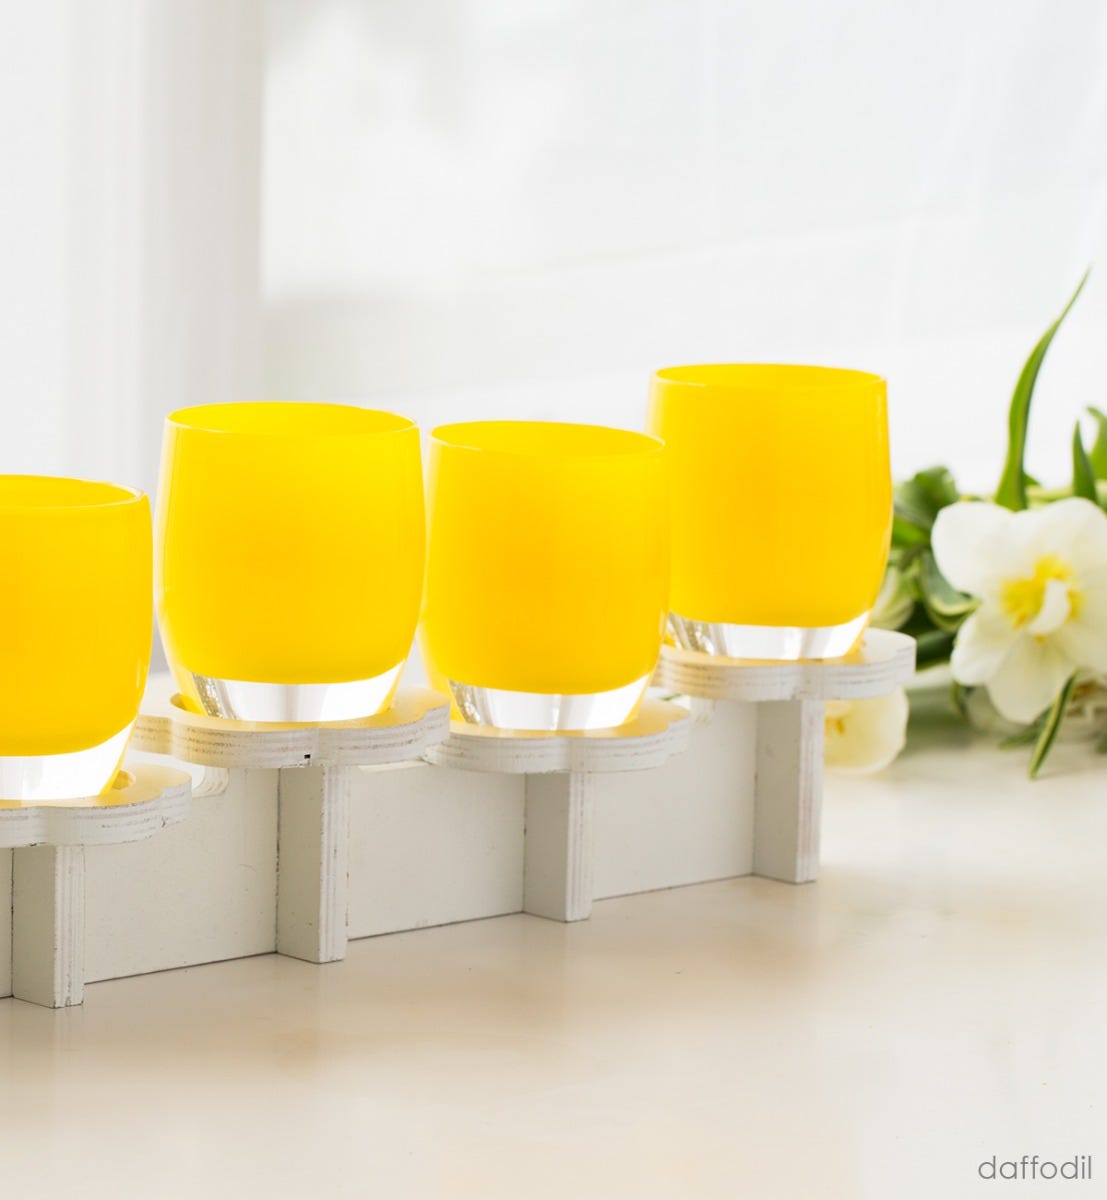 daffodil opaque yellow hand-blown glass votive candle holder